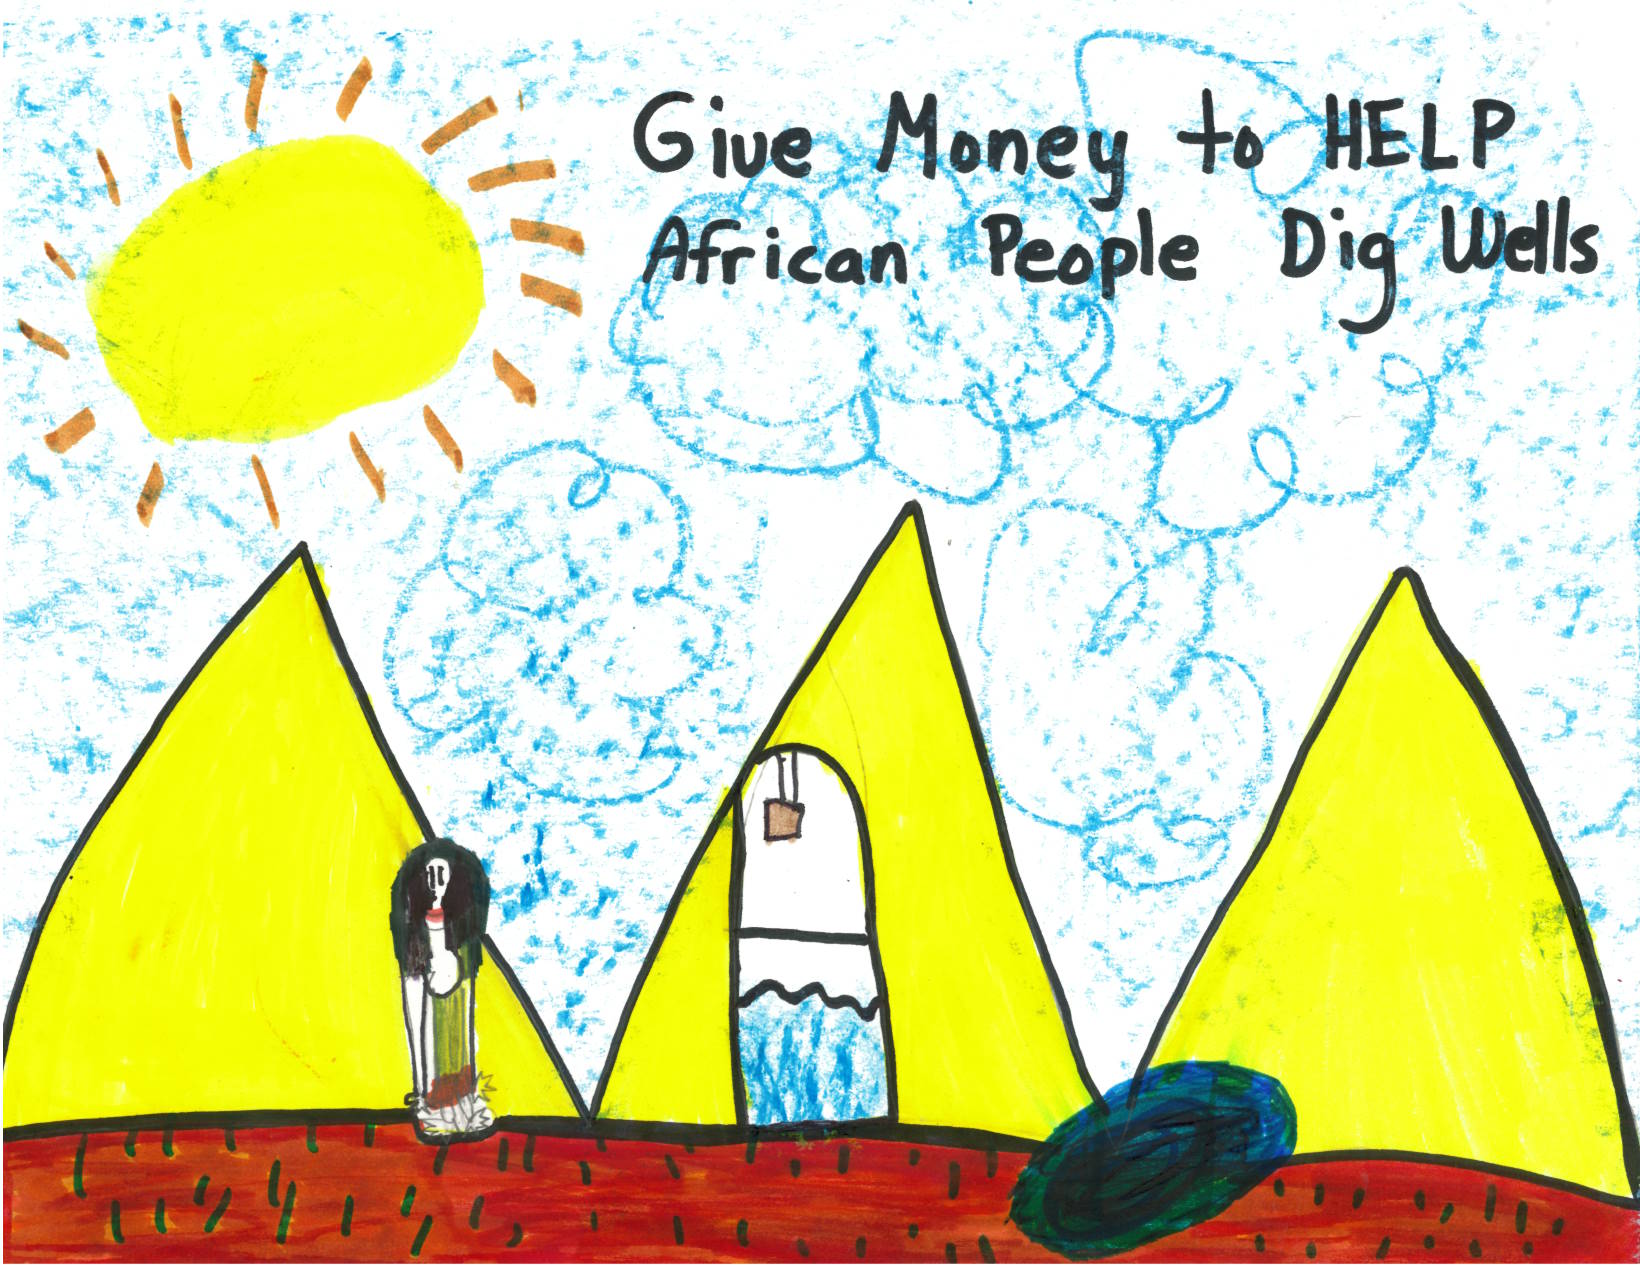 A children's drawing of a lady by the pyramids of Africa standing next to a well.